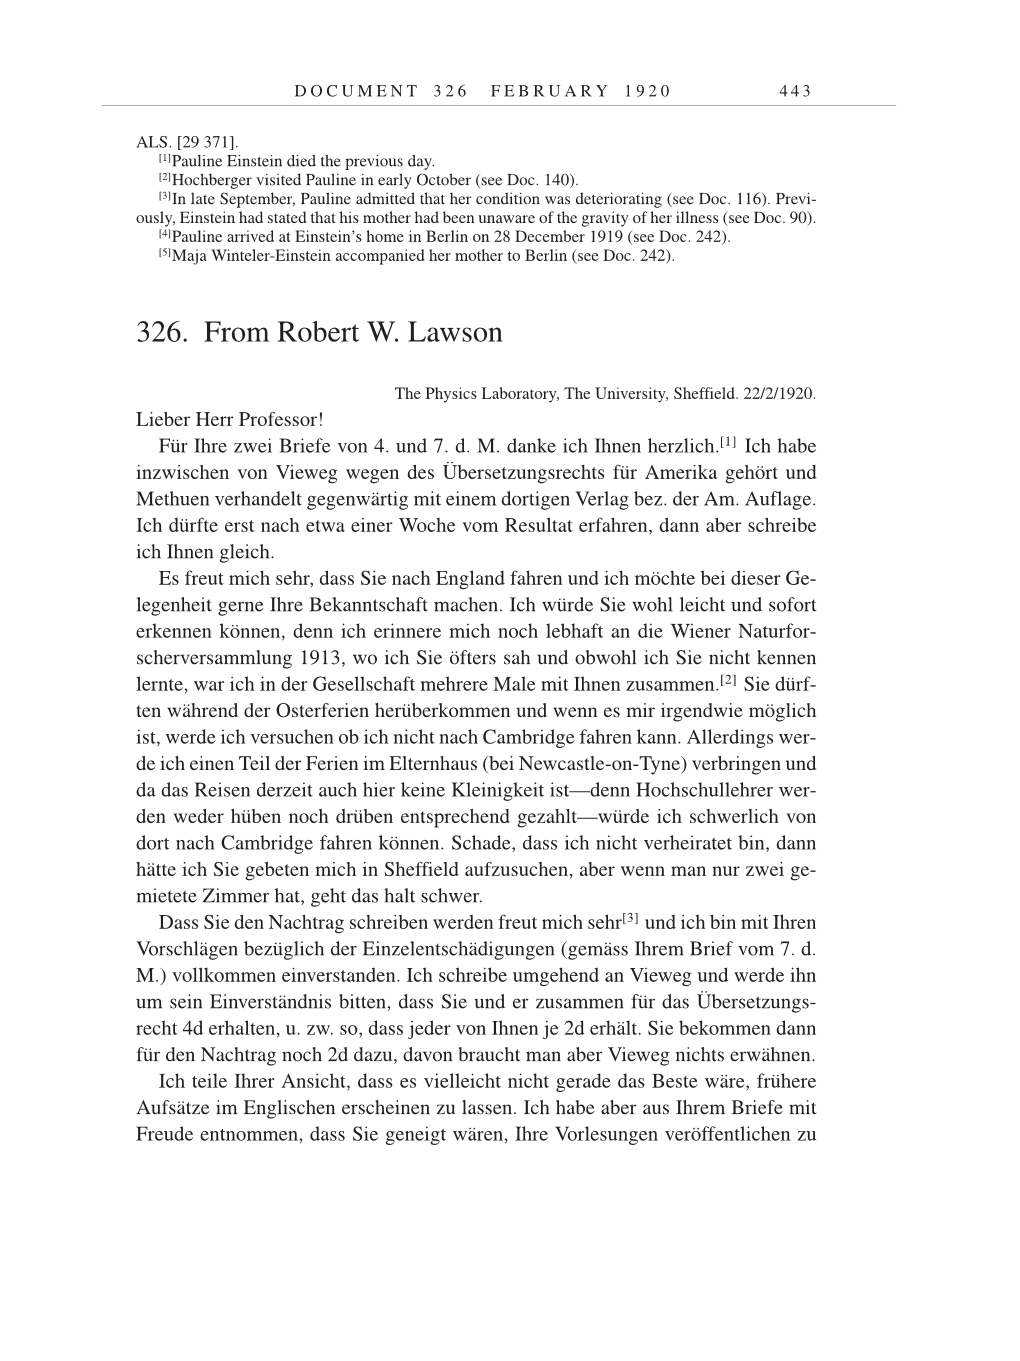 Volume 9: The Berlin Years: Correspondence January 1919-April 1920 page 443